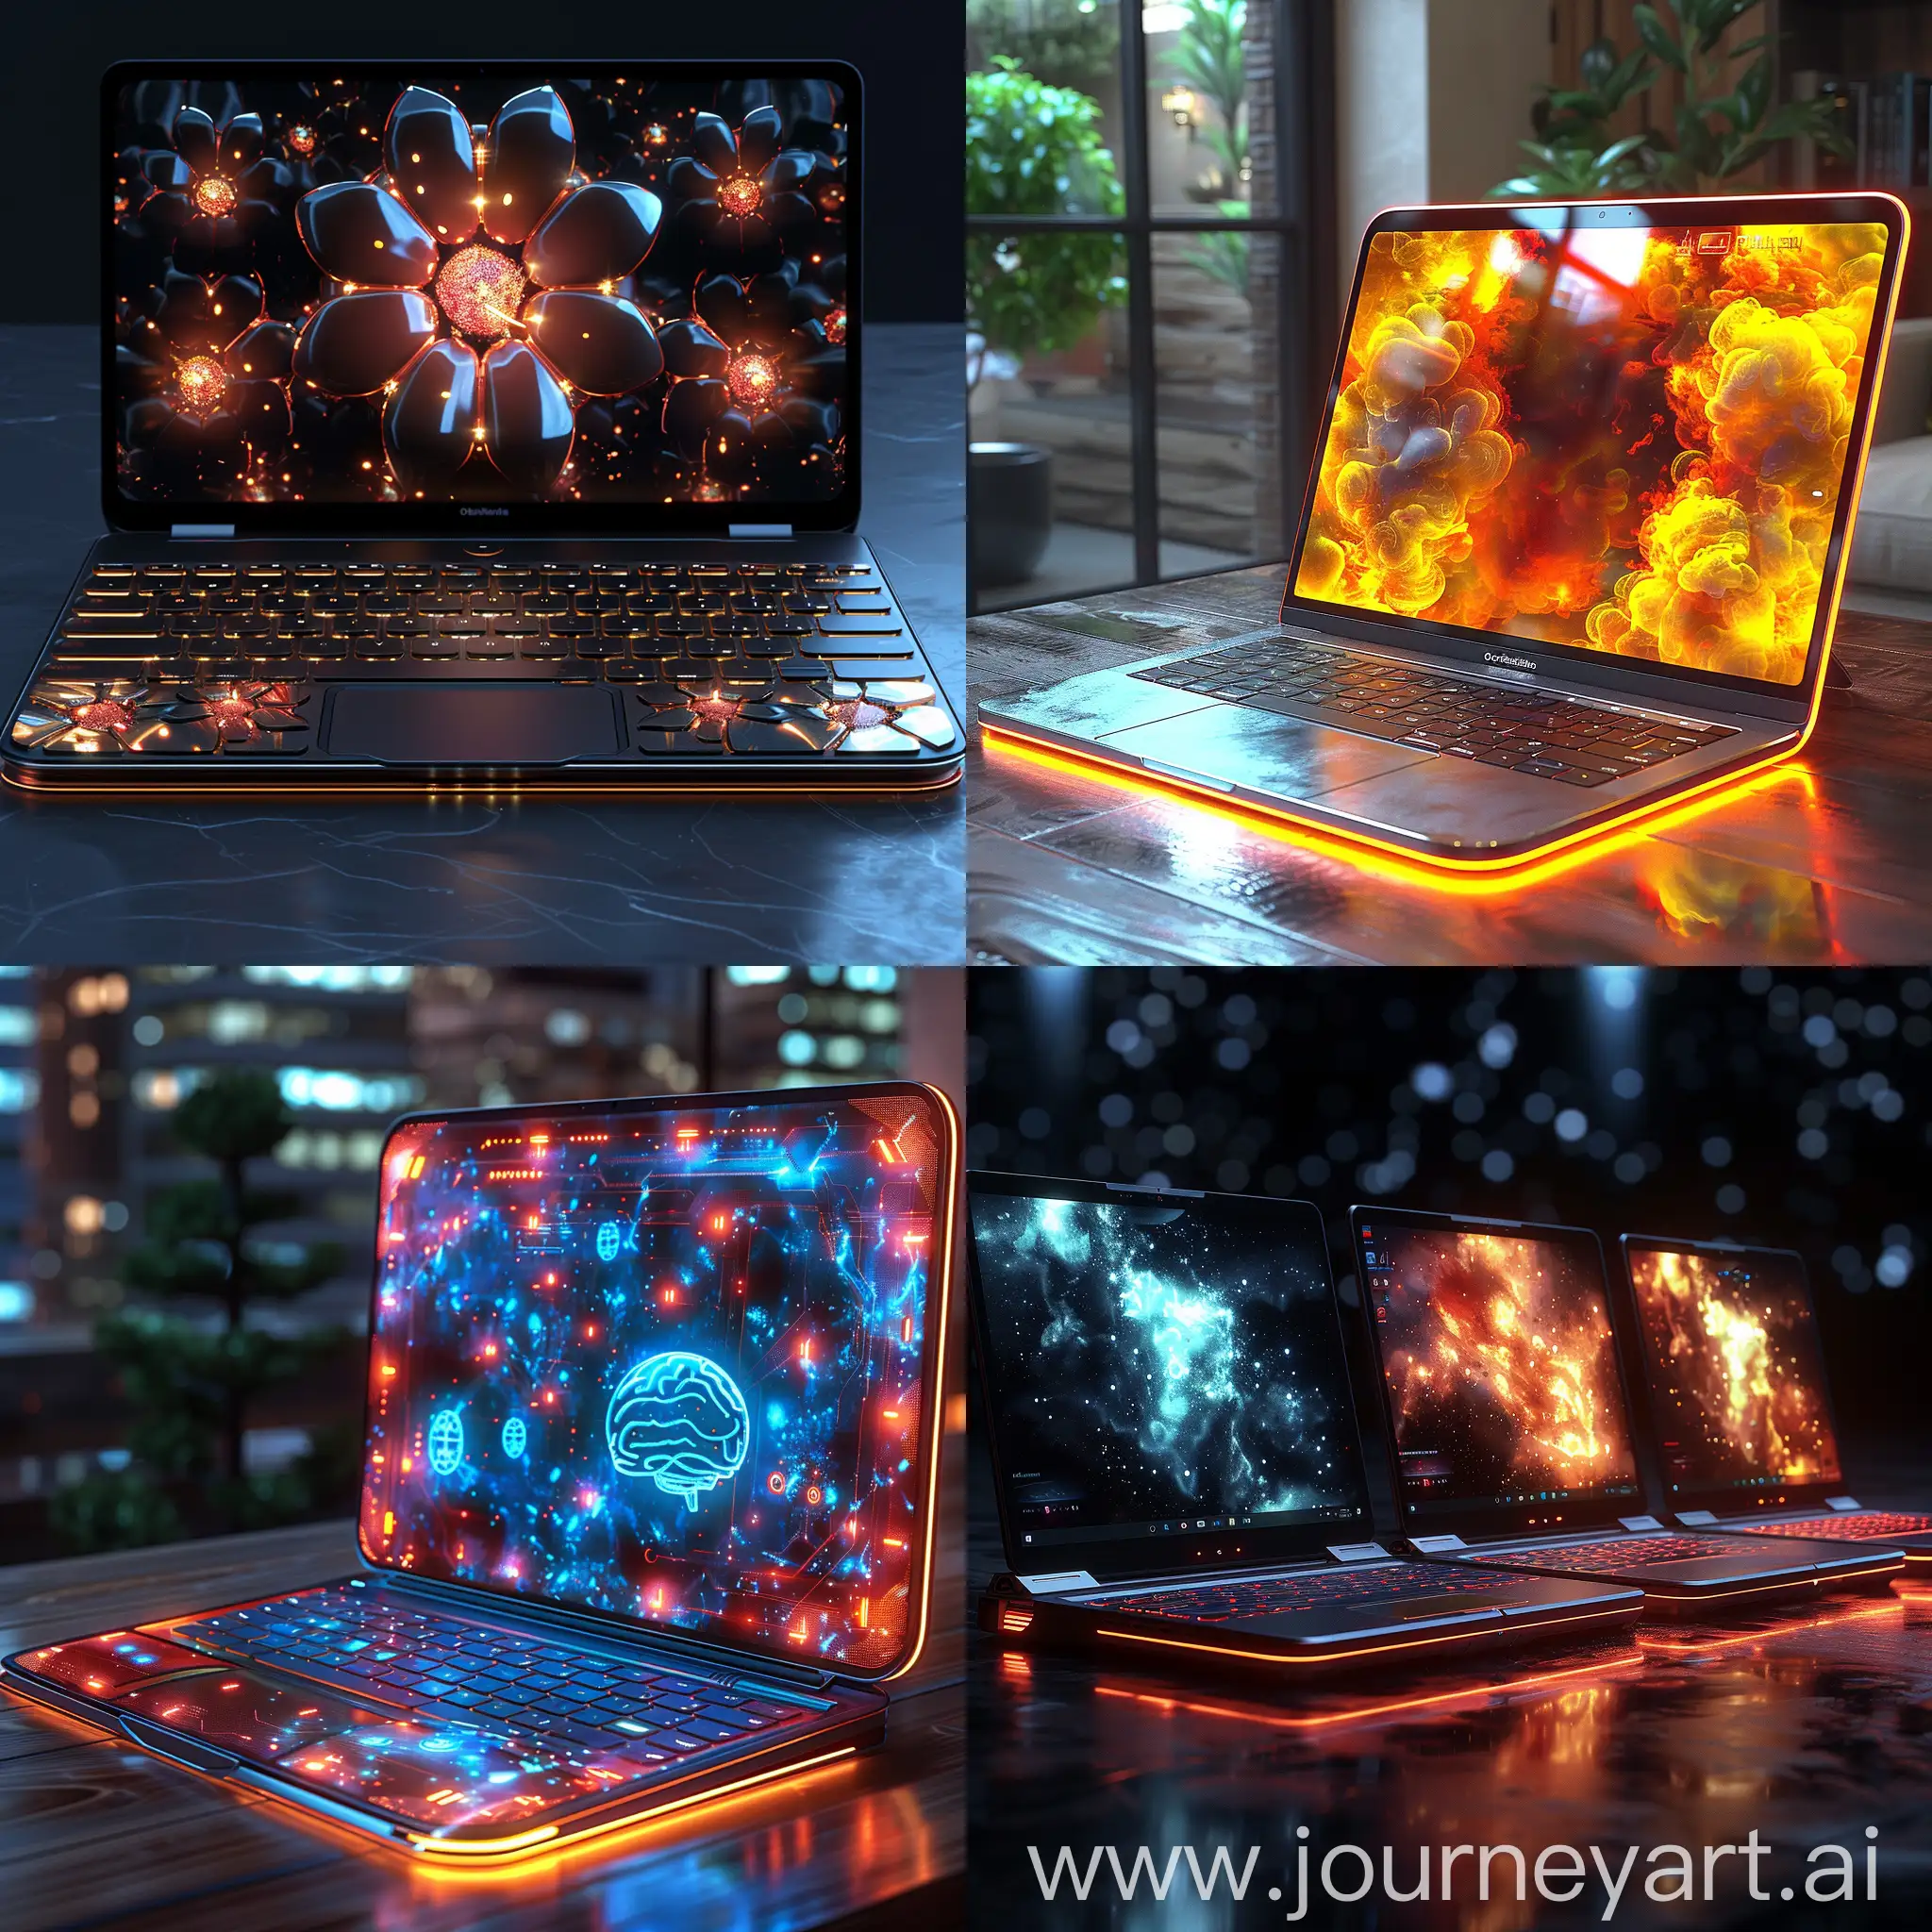 Futuristic laptop, foldable screens, augmented reality and virtual reality integration, brain-computer interface control, self-healing materials, enhanced connectivity, ai-powered assistants, sustainable materials and design, octane render --stylize 1000